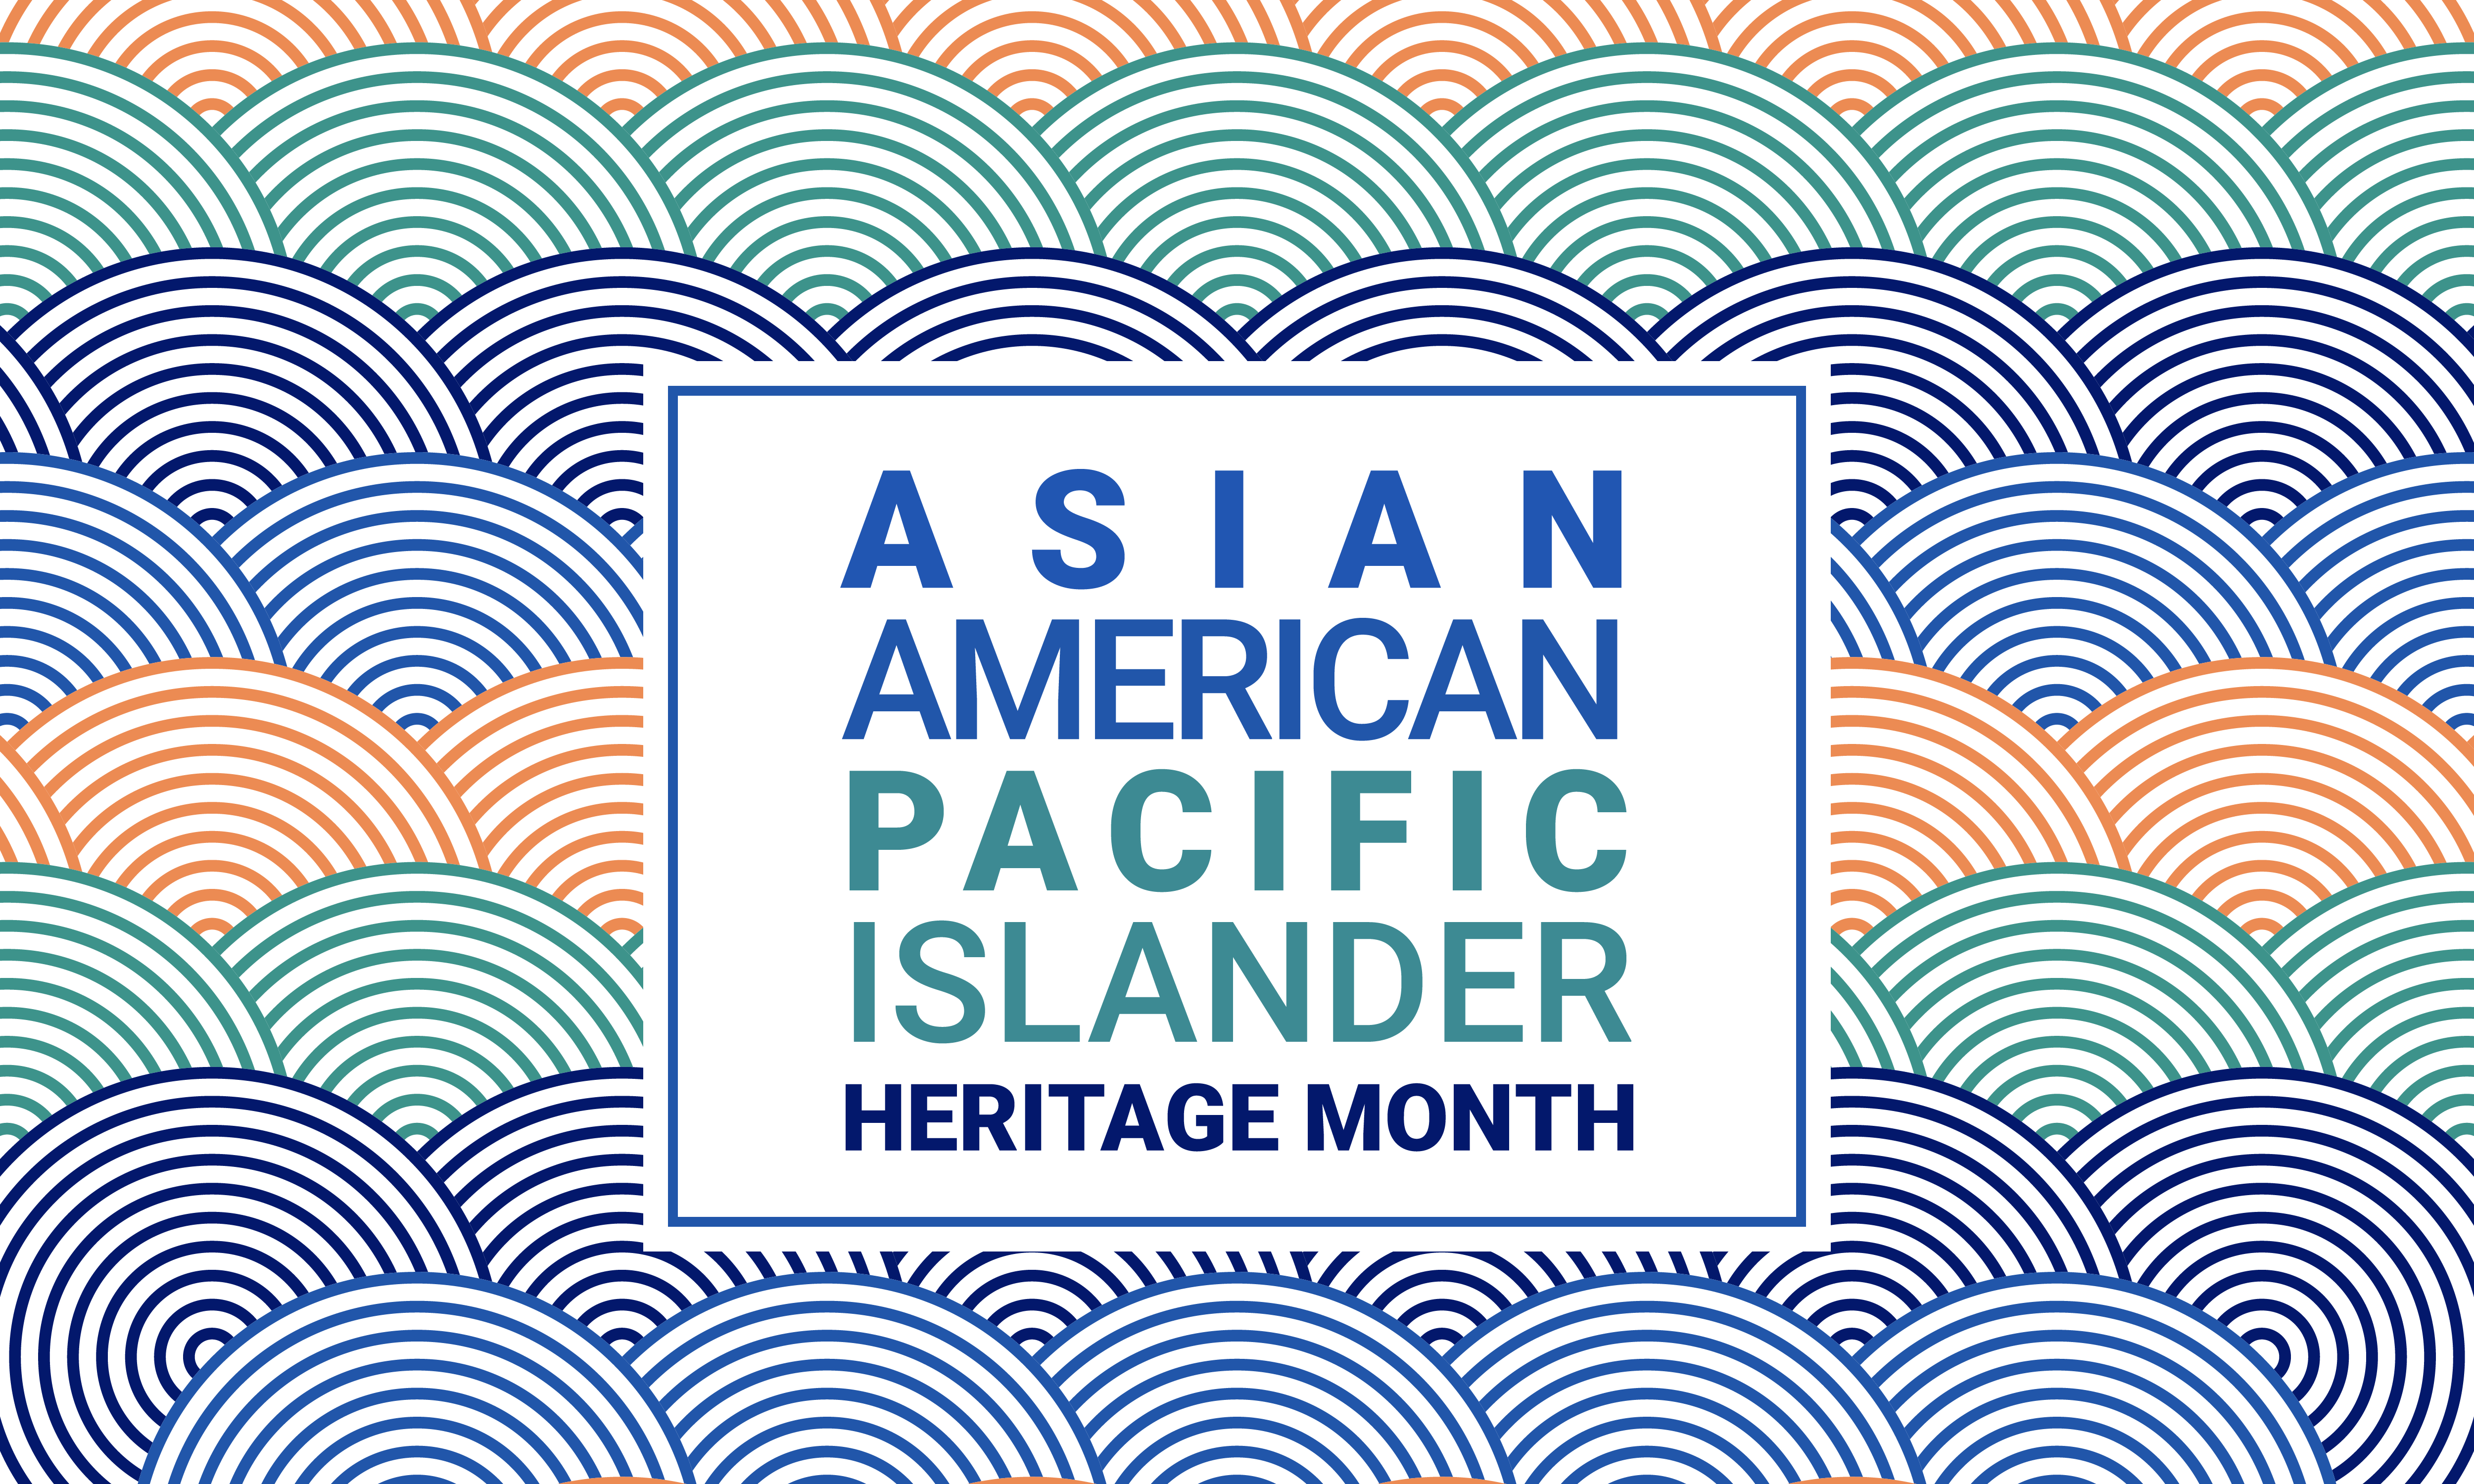 Asian American Pacific Islander Heritage Month themed background